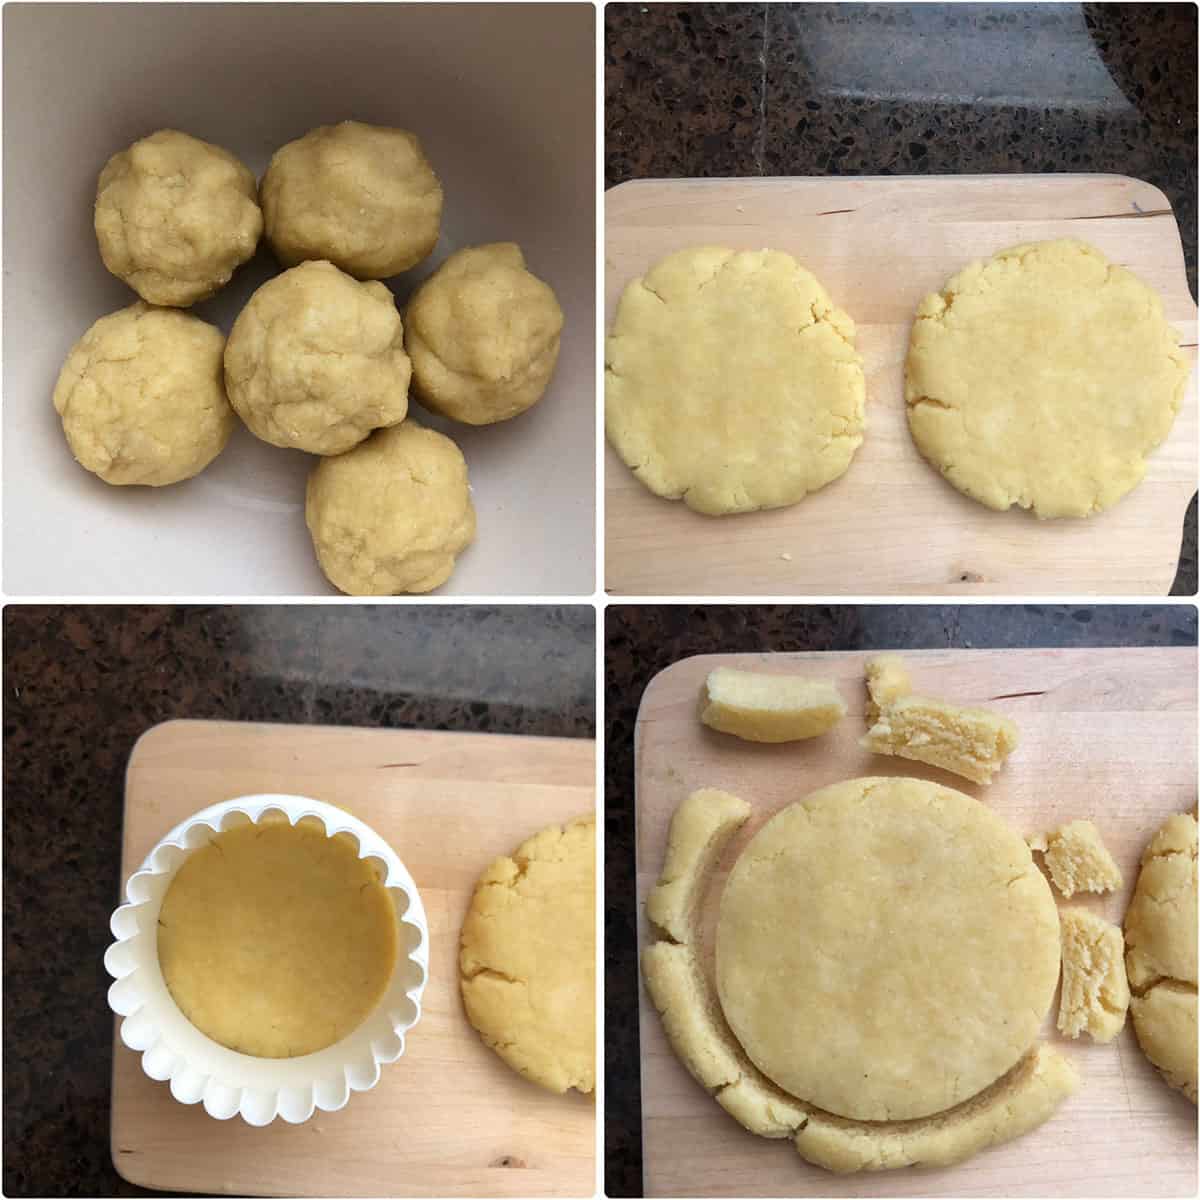 Dough divided into 6 pieces, formed into a disc and cut into circles